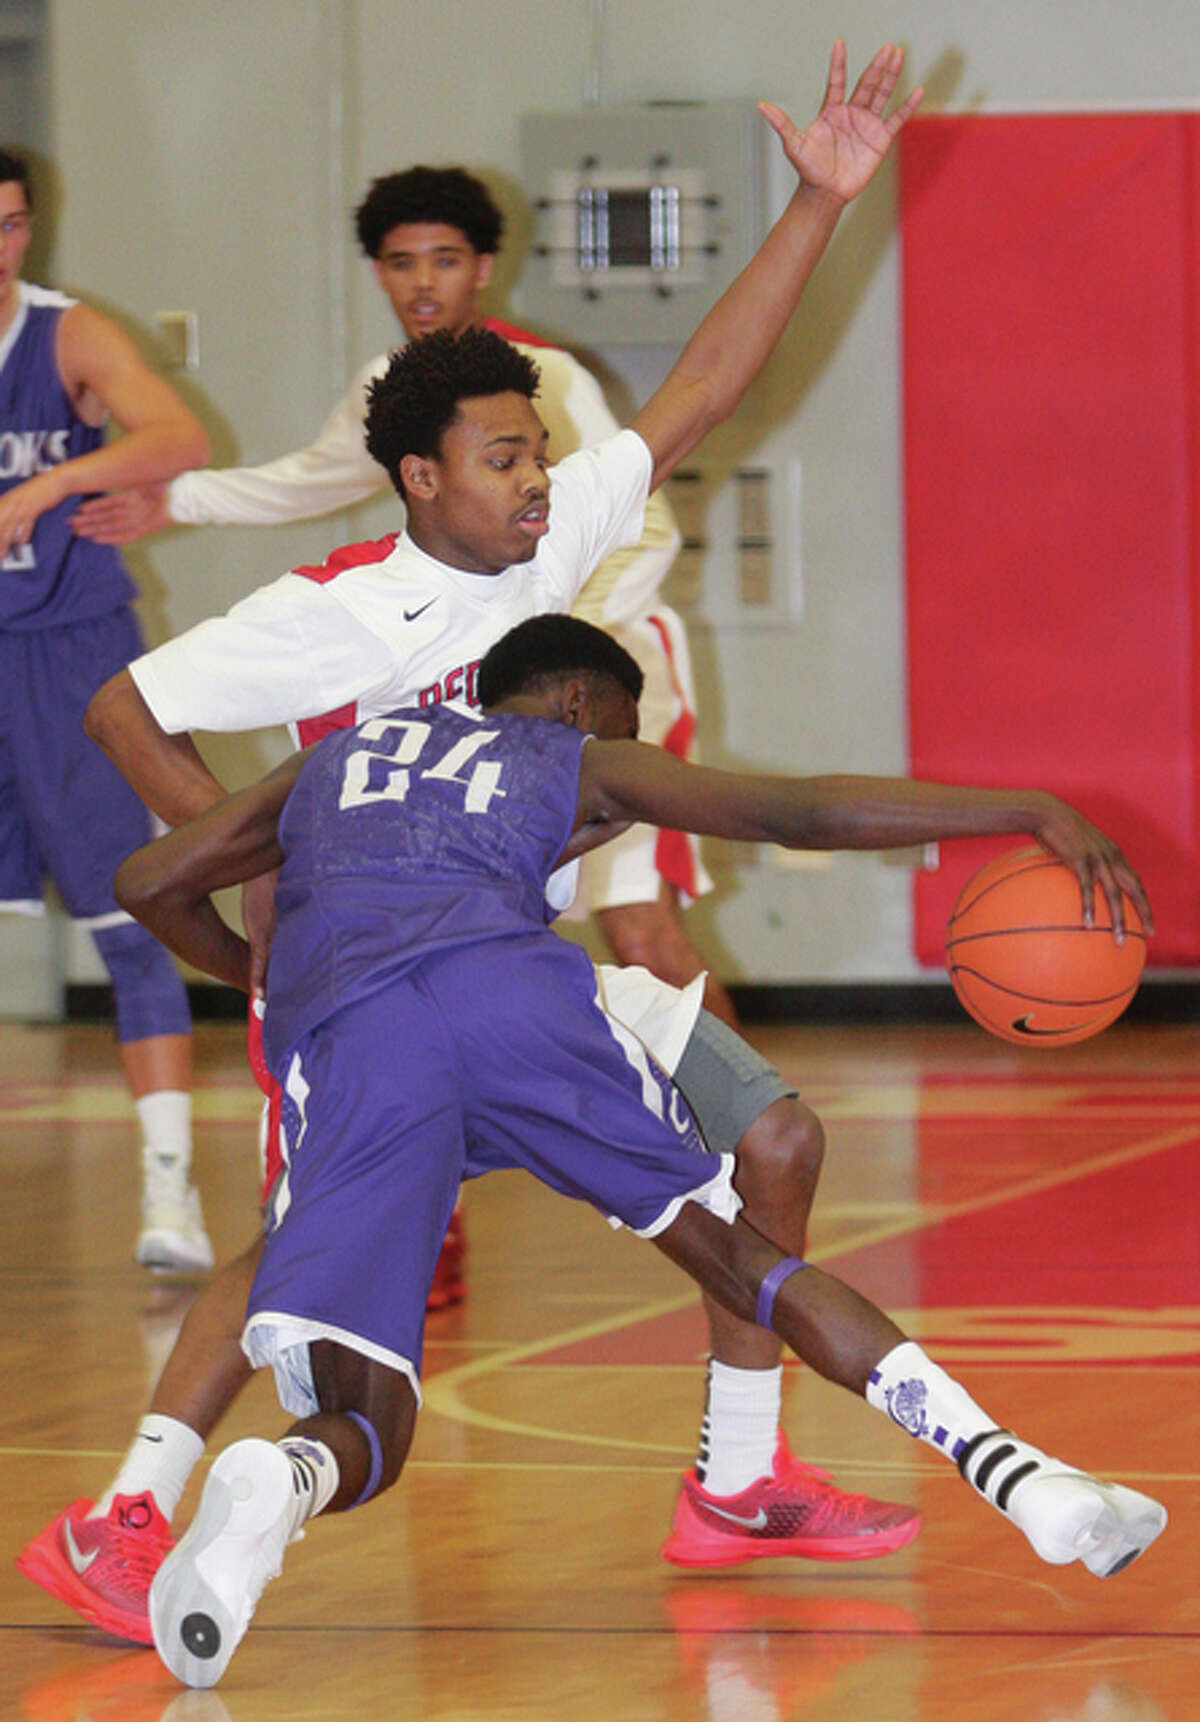 Alton’s Jordan Golley defends Collinsville’s Ronnie Midgett (24) on the perimeter during the Redbirds’ SWC victory Dec. 18 at Alton High. The 6-2 Redbirds hit the holidays unbeaten and tied for first in the Southwestern Conference race at 4-0.